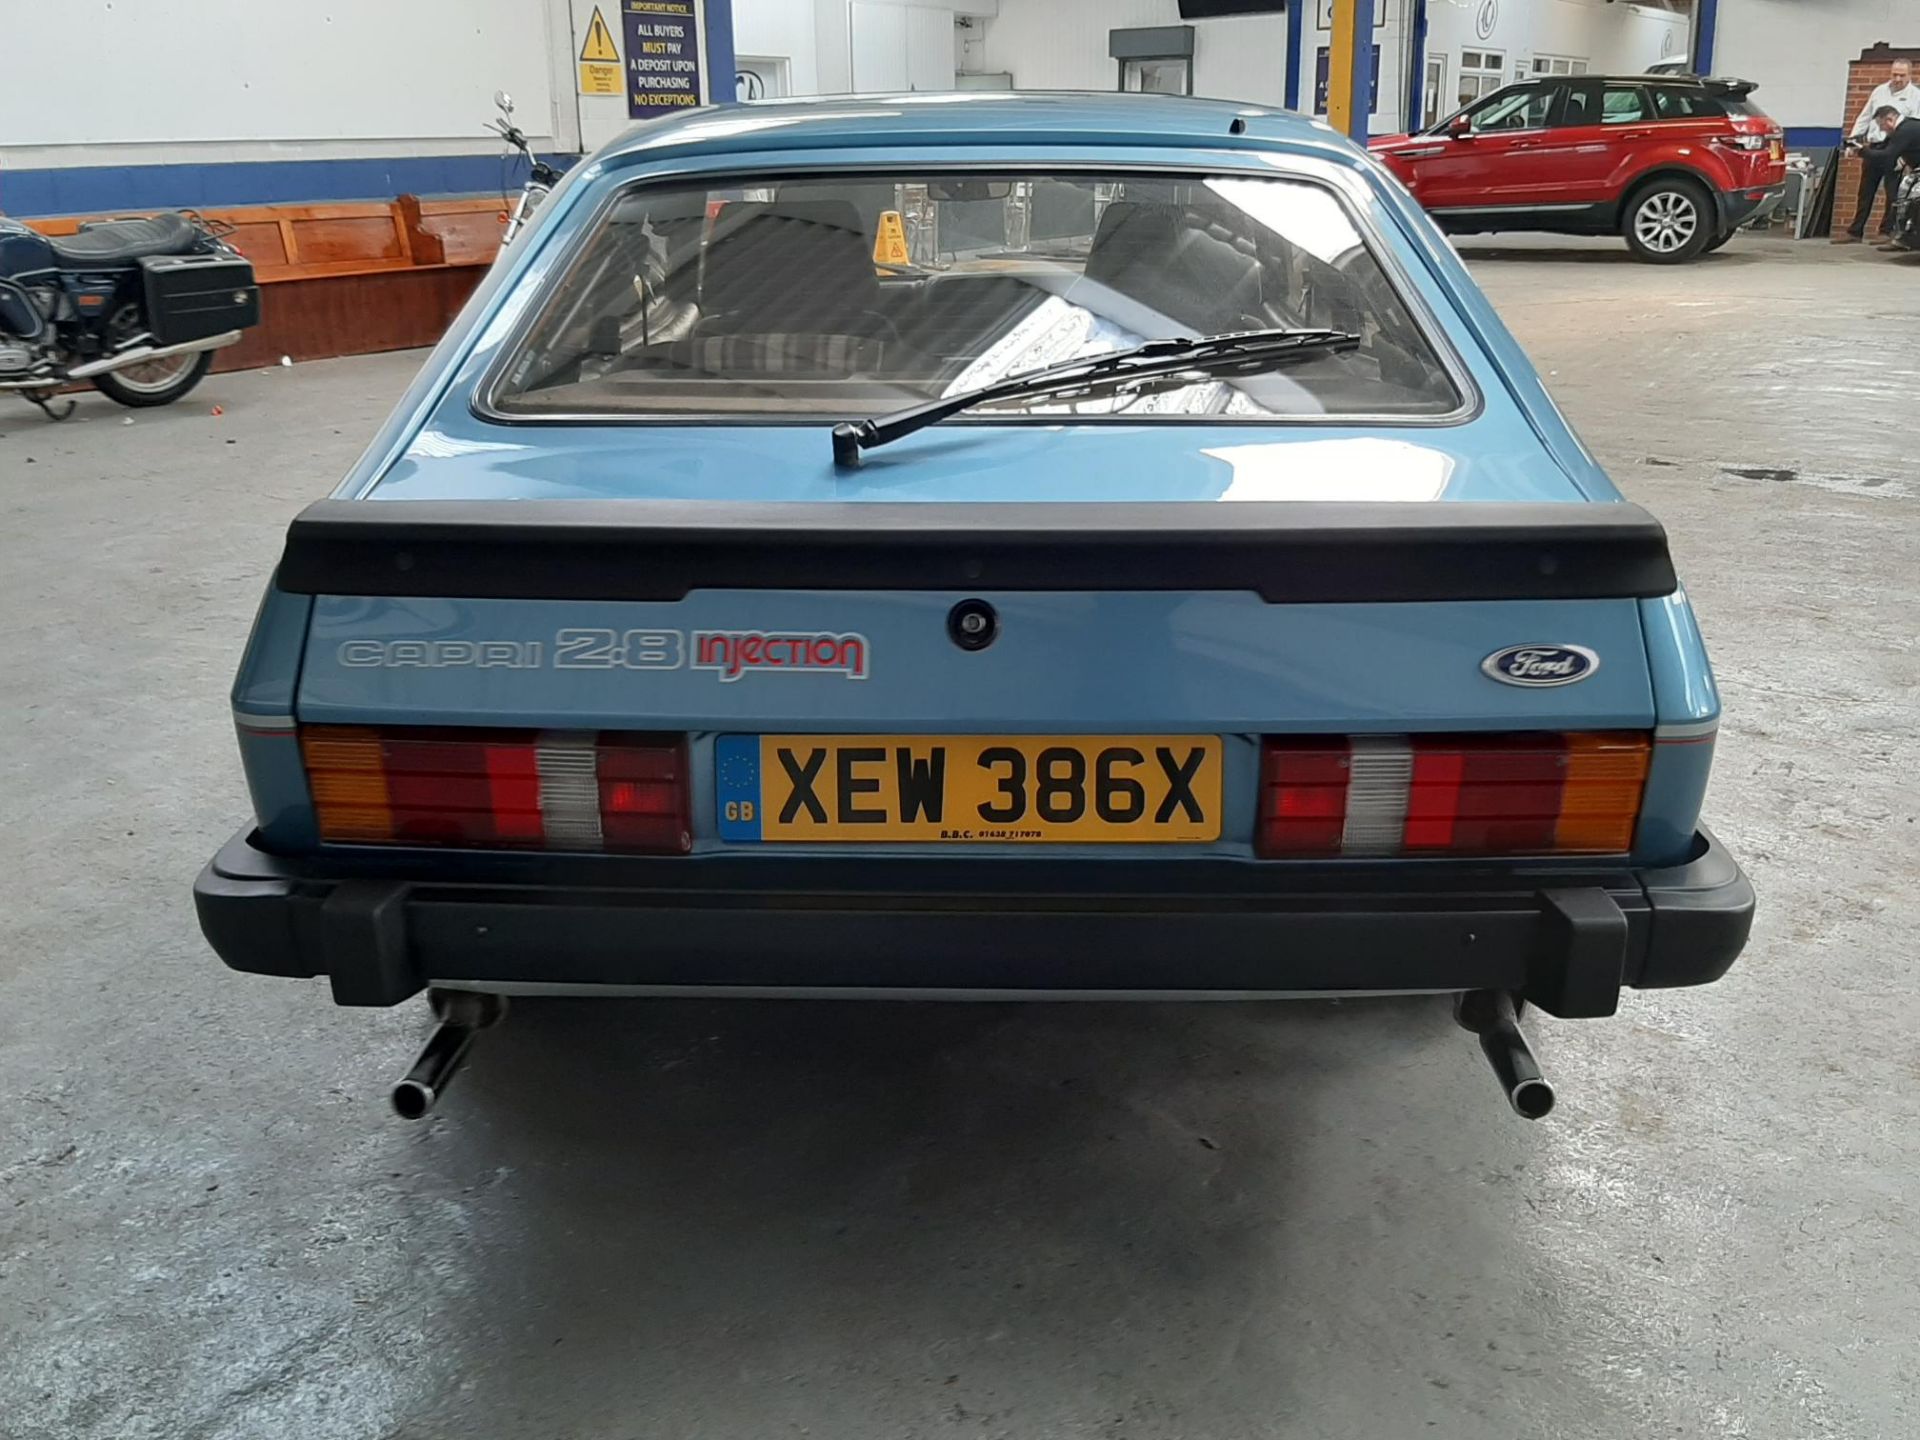 1982 Ford Capri 2.8 Injection - Image 6 of 23